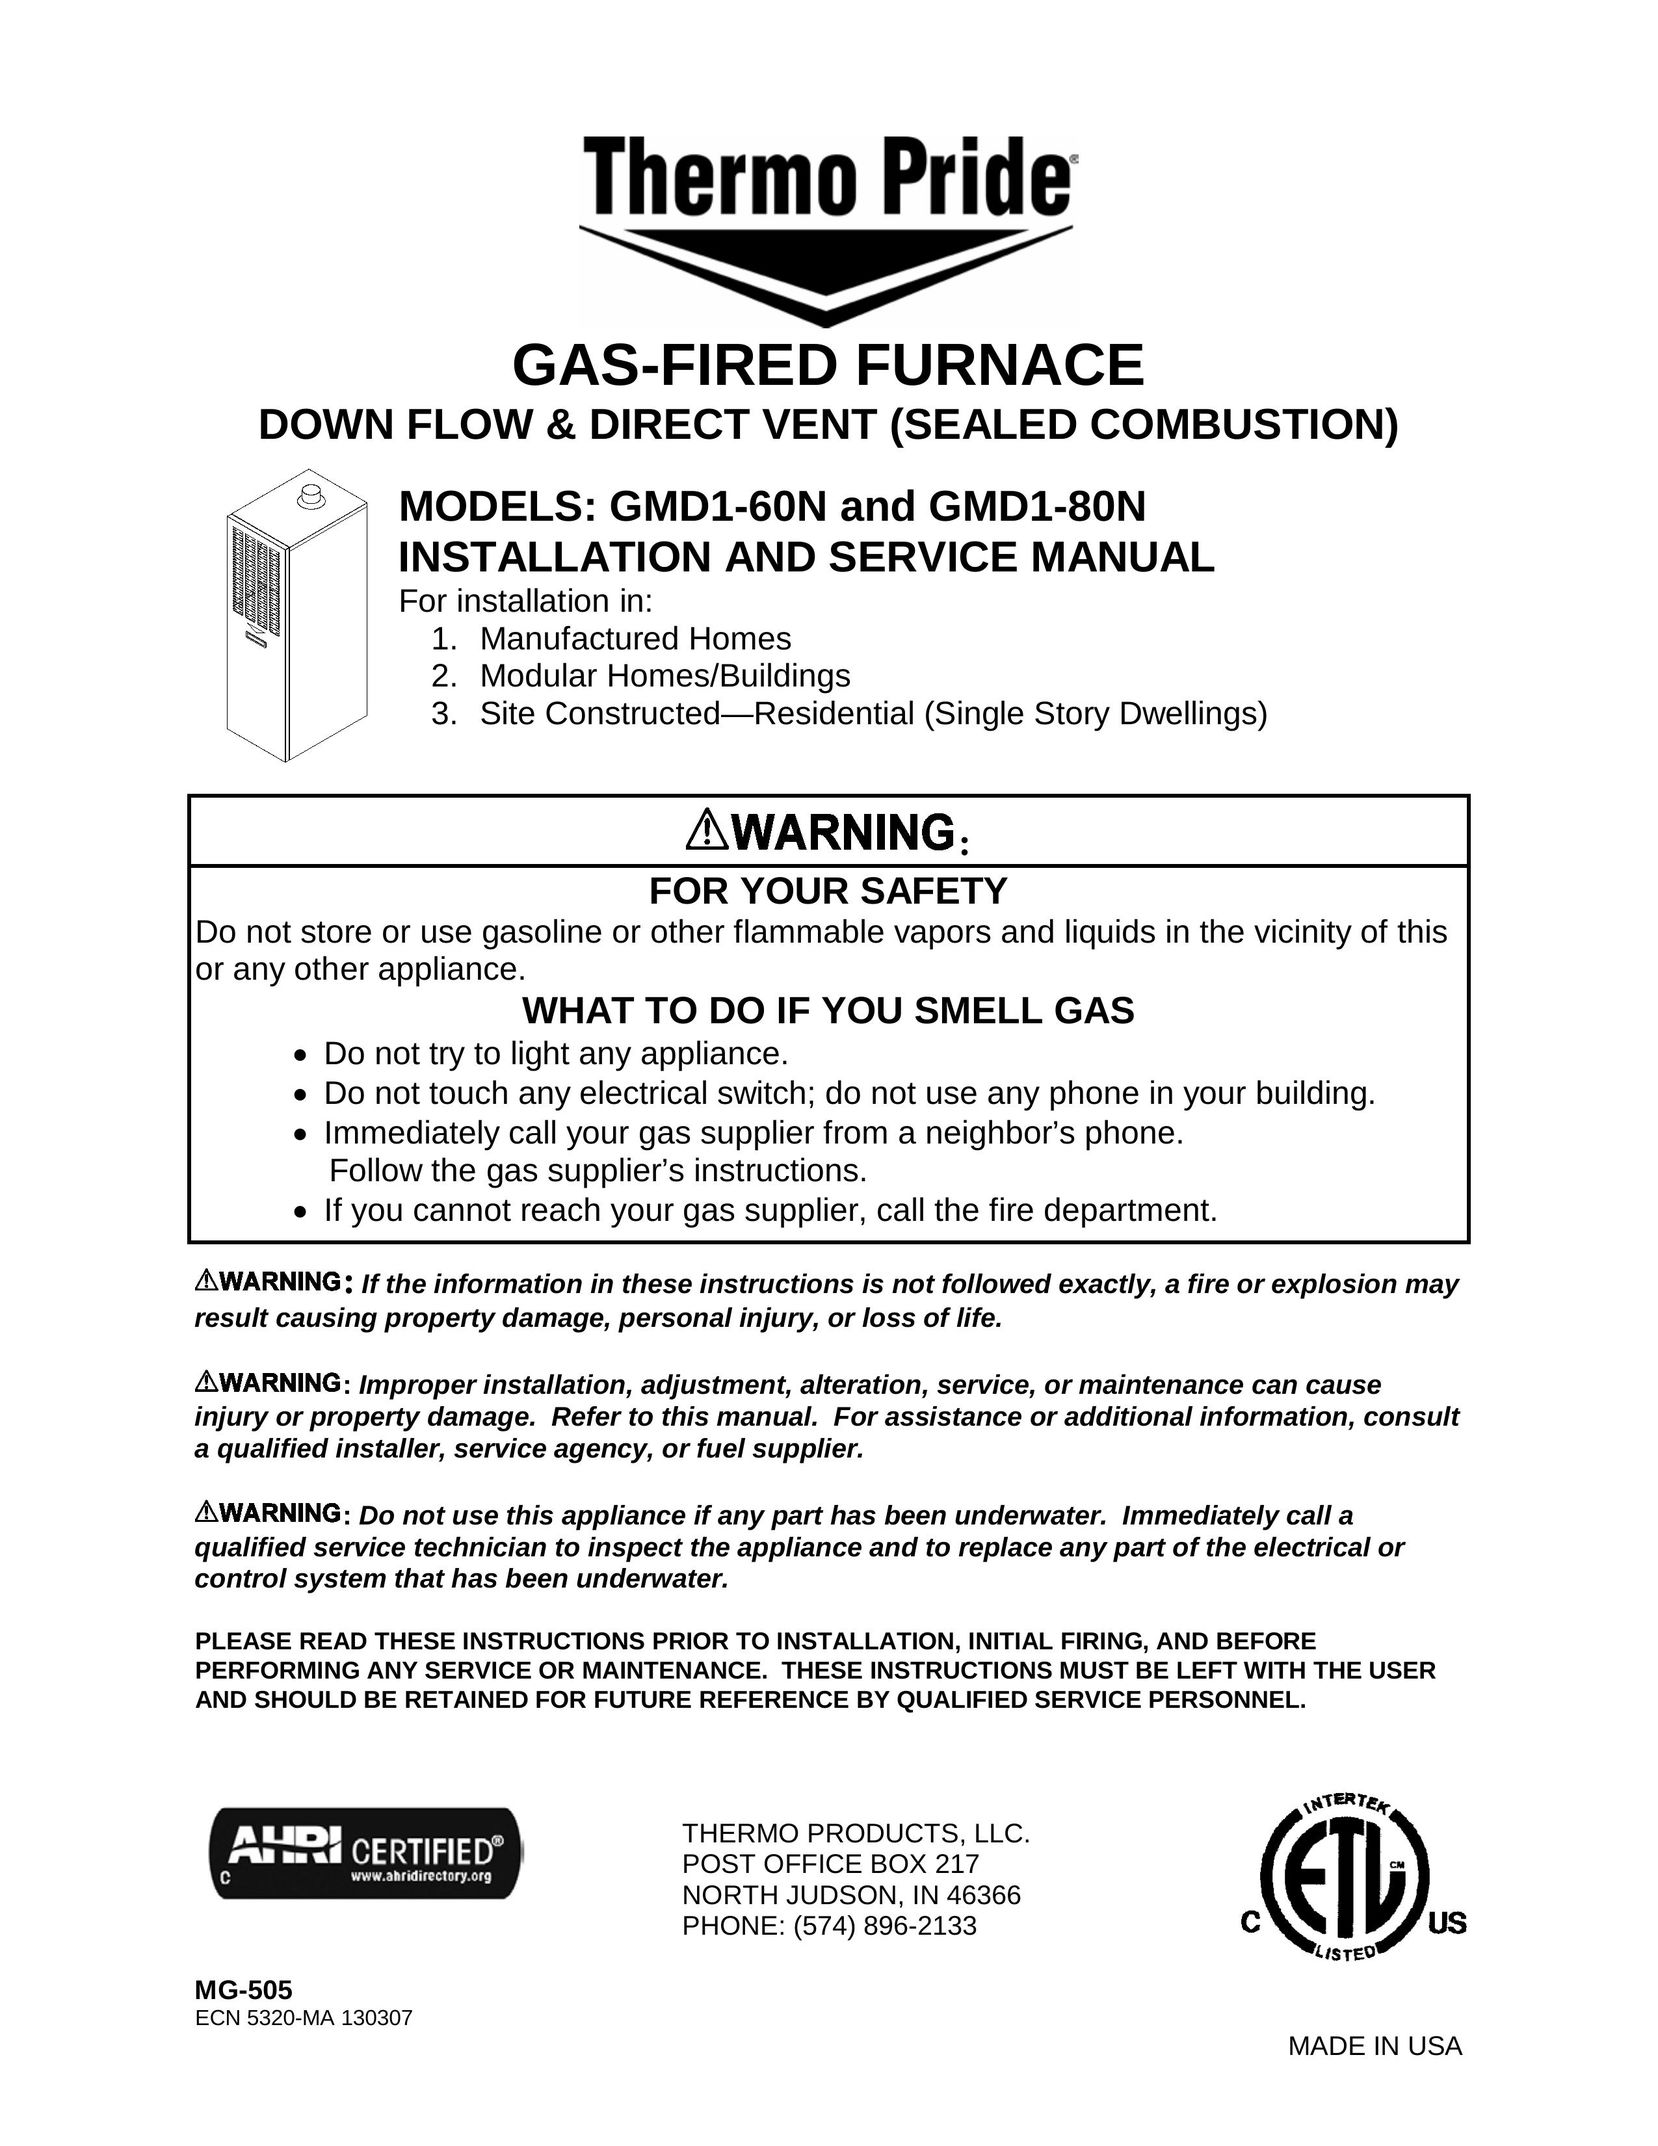 Thermo Products GMD1-60N Burner User Manual